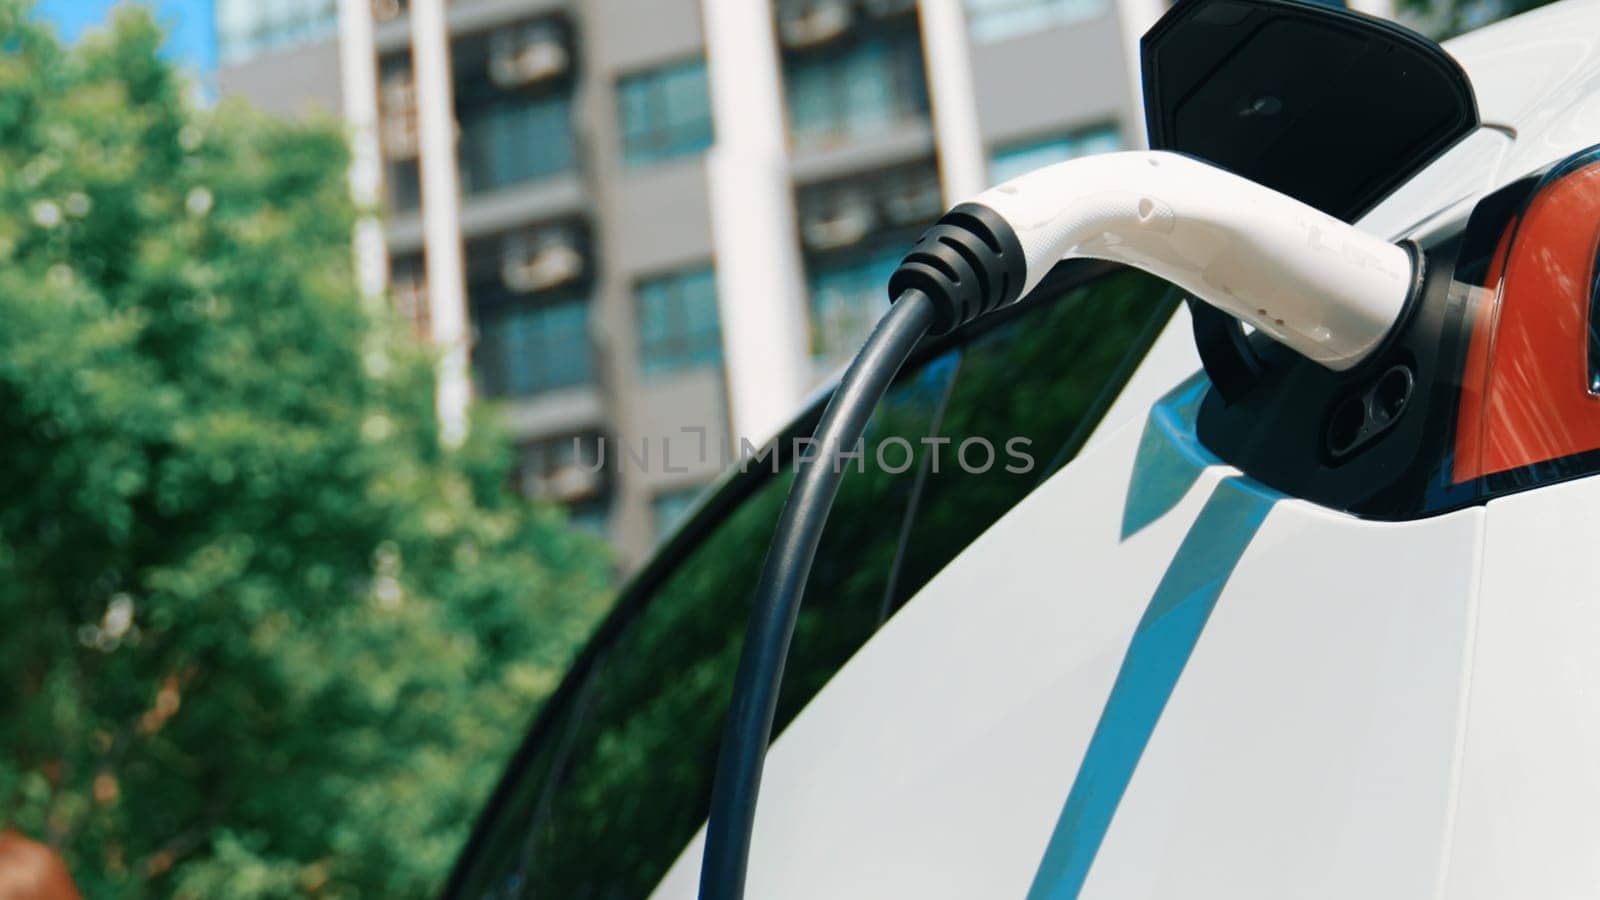 EV electric car charging in green sustainable city innards by biancoblue